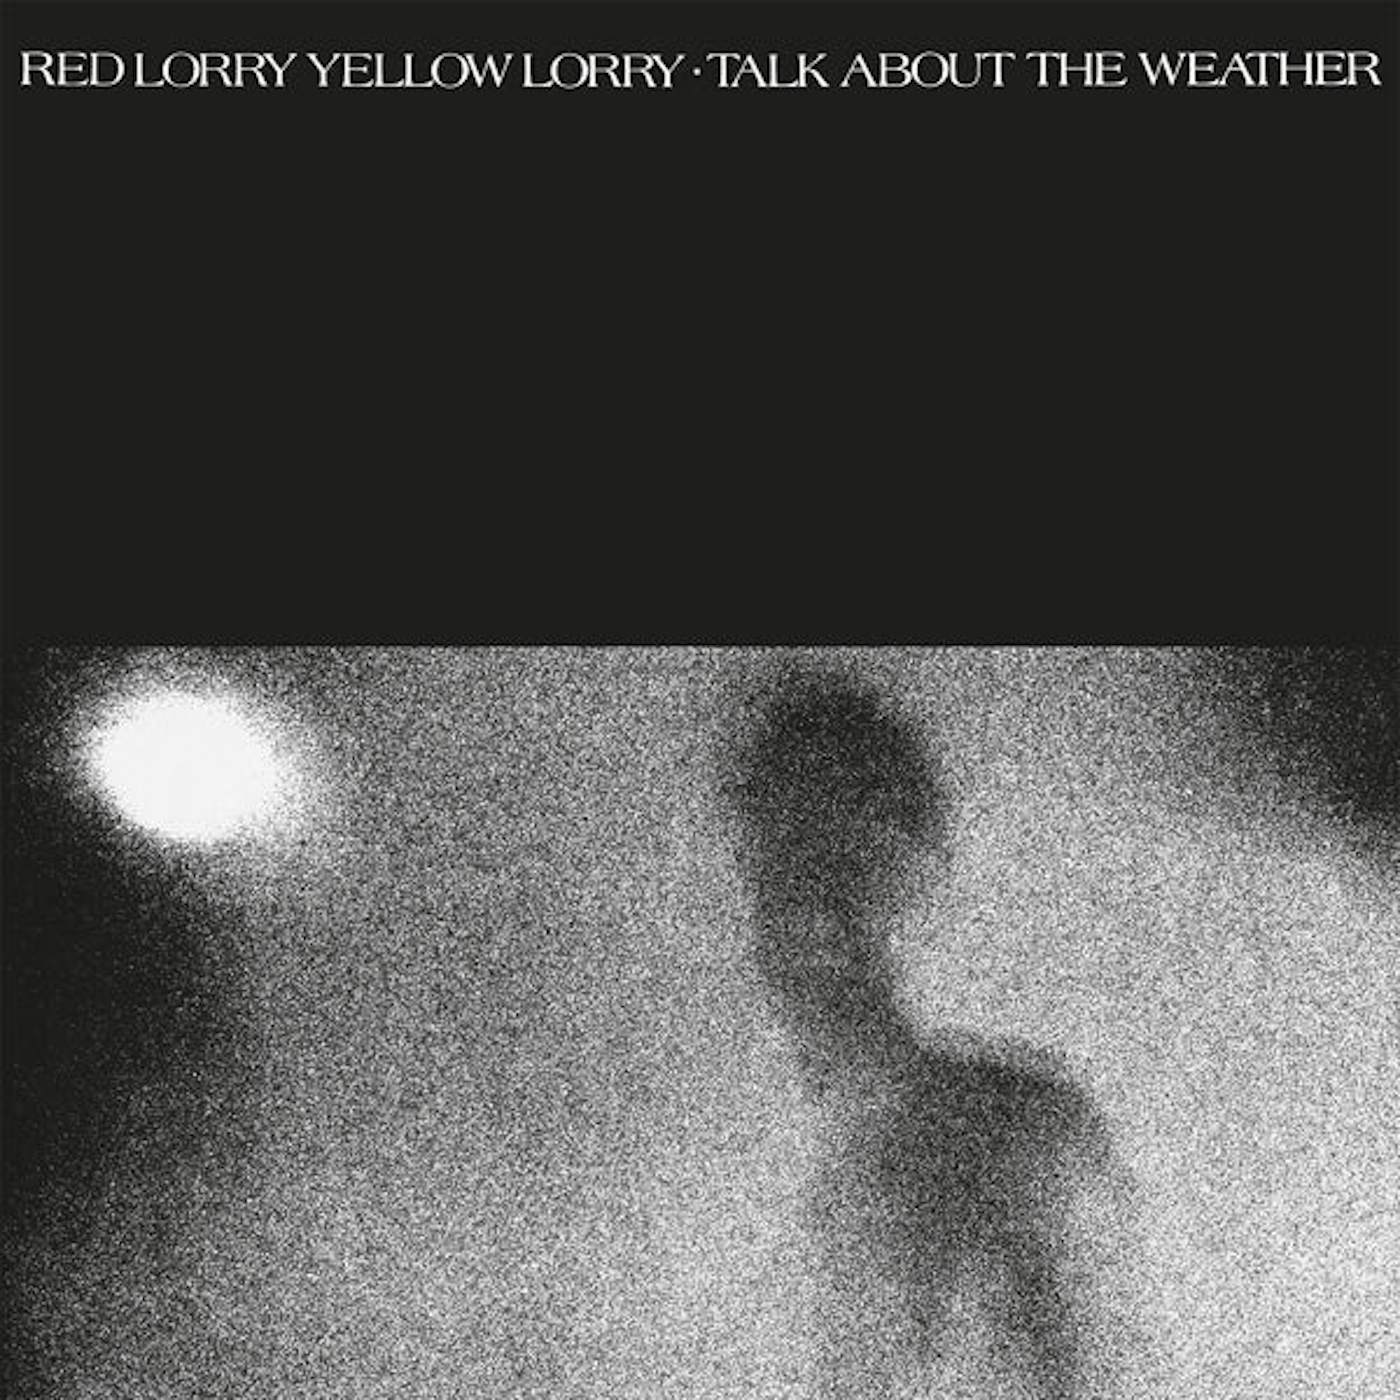 Red Lorry Yellow Lorry LP - Talk About The Weather (White Vinyl)